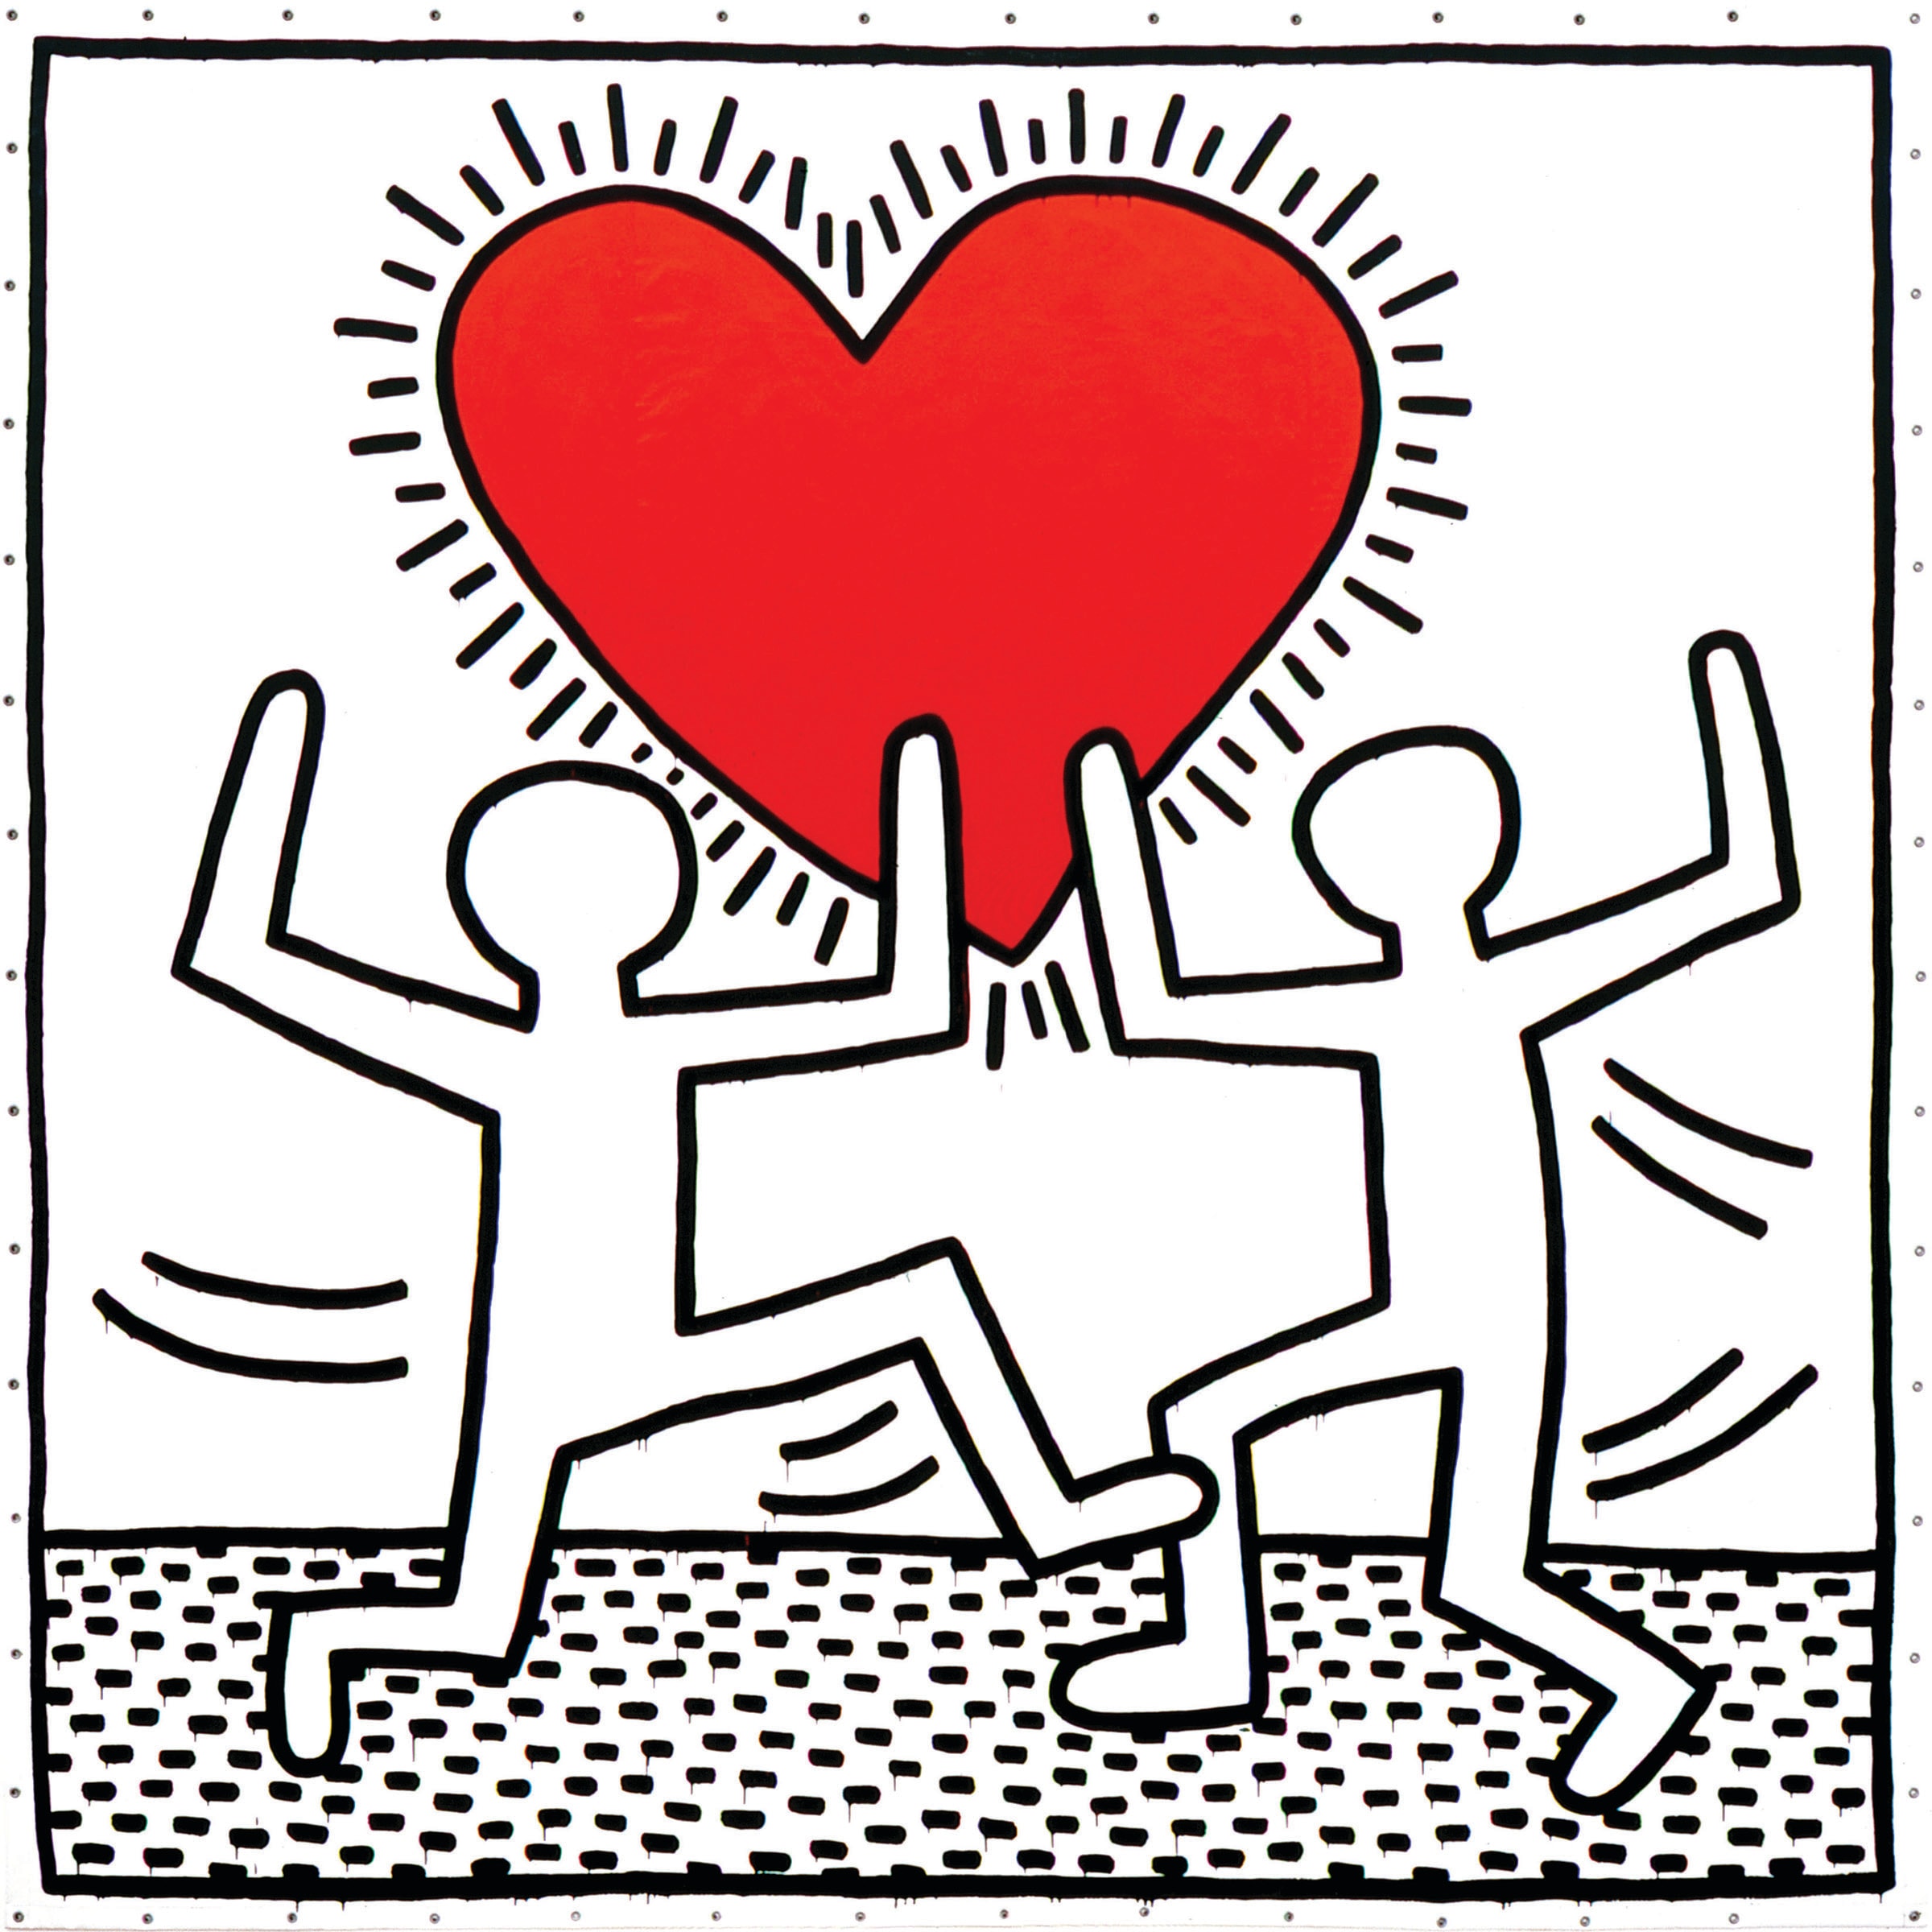 Keith Haring, Untitled, 1982. Courtesy of the Rubell Museum DC.